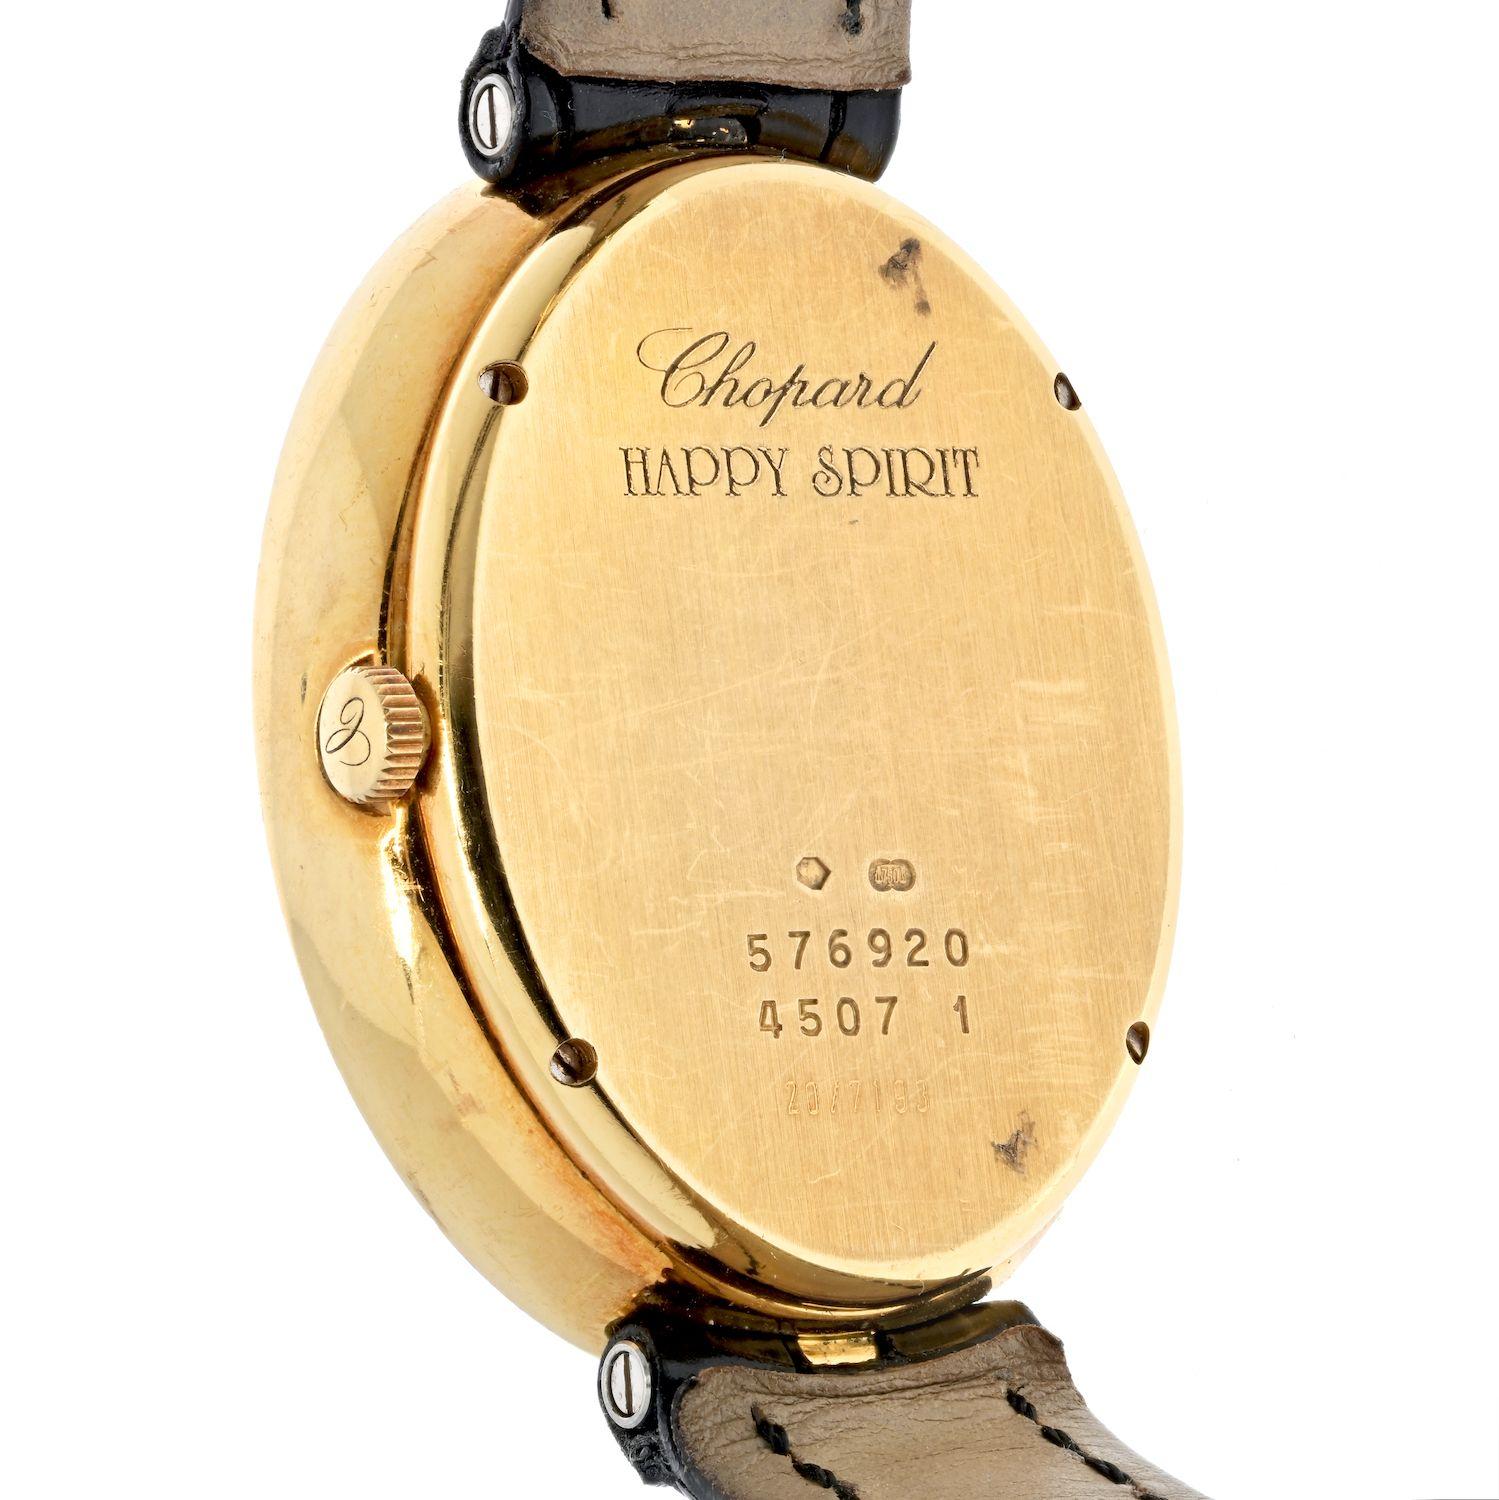 Chopard Happy Spirit Diamond watches make beautiful ladies wristwatches due to their elegant and feminine design, high-quality materials, and the luxurious touch of diamonds. Take a look at this Mother Of Pearl Oval Case Diamond Happy Spirit model,